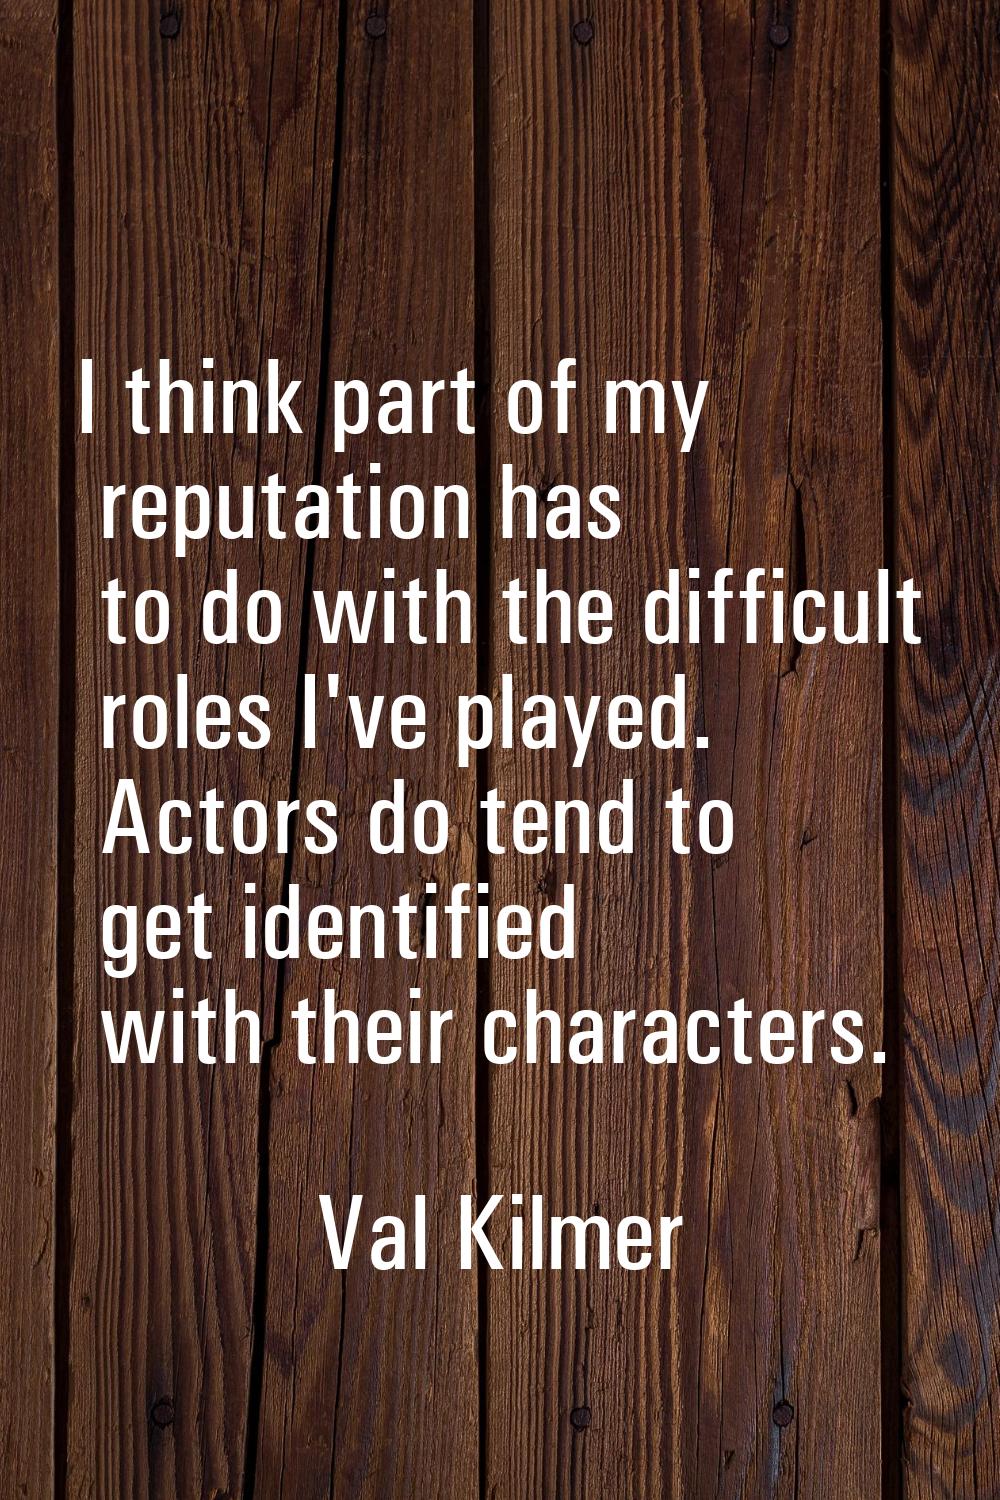 I think part of my reputation has to do with the difficult roles I've played. Actors do tend to get